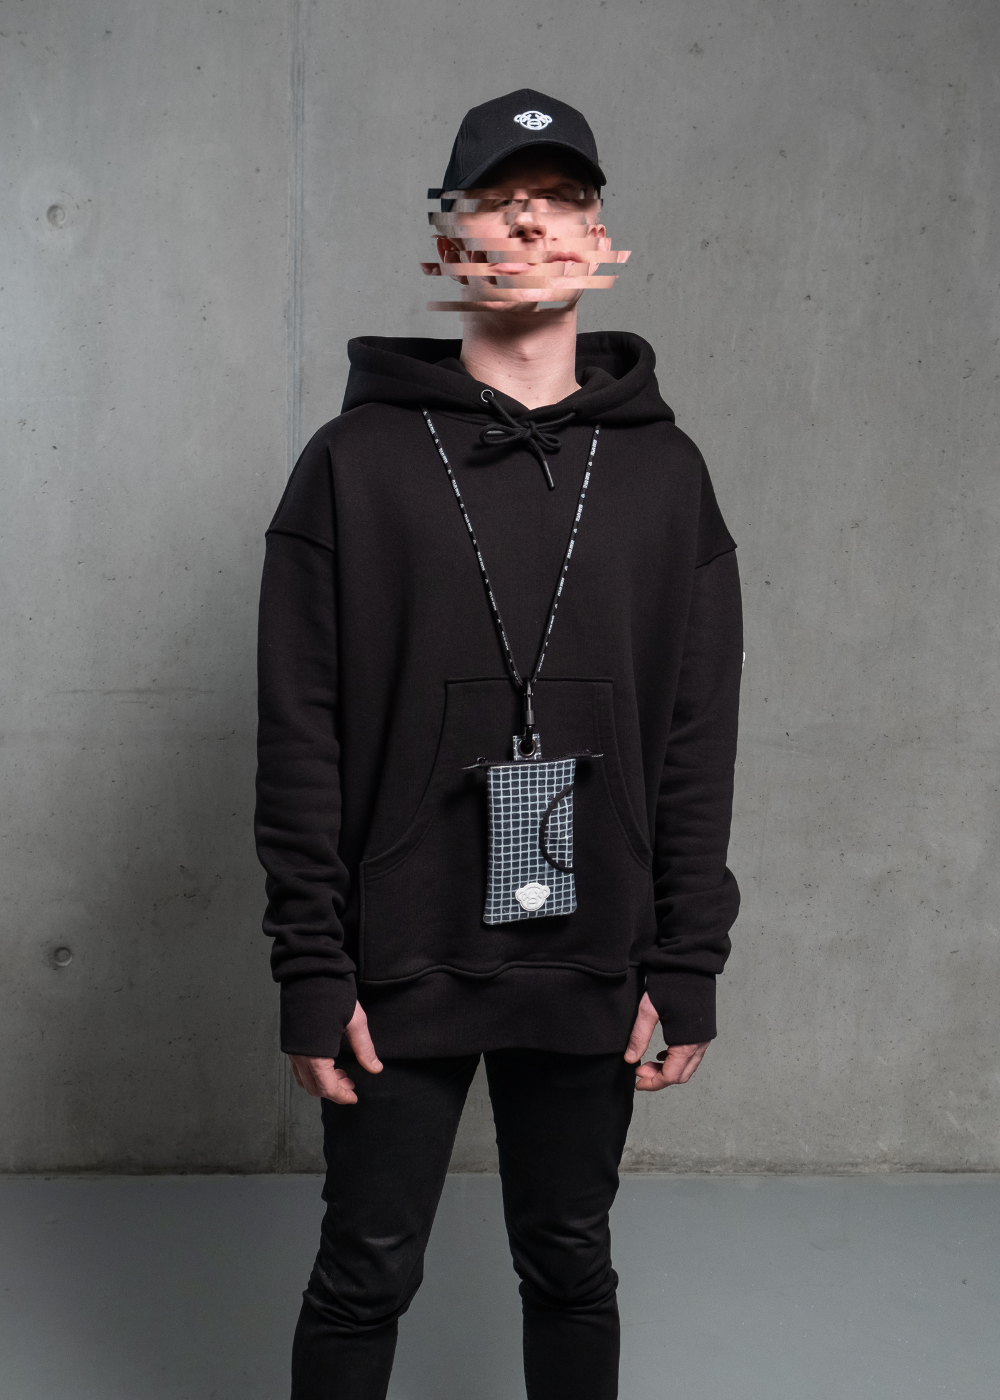 Responsible Streetfashion // Hoodie mit oversized Kapuze und DEAD APE 3D Icon Patch – spende 10% zur Rettung der Orang-Utans. // Hoodie with oversized Hood and DEAD APE 3D icon patch – donate 10% to safe the orangutans.